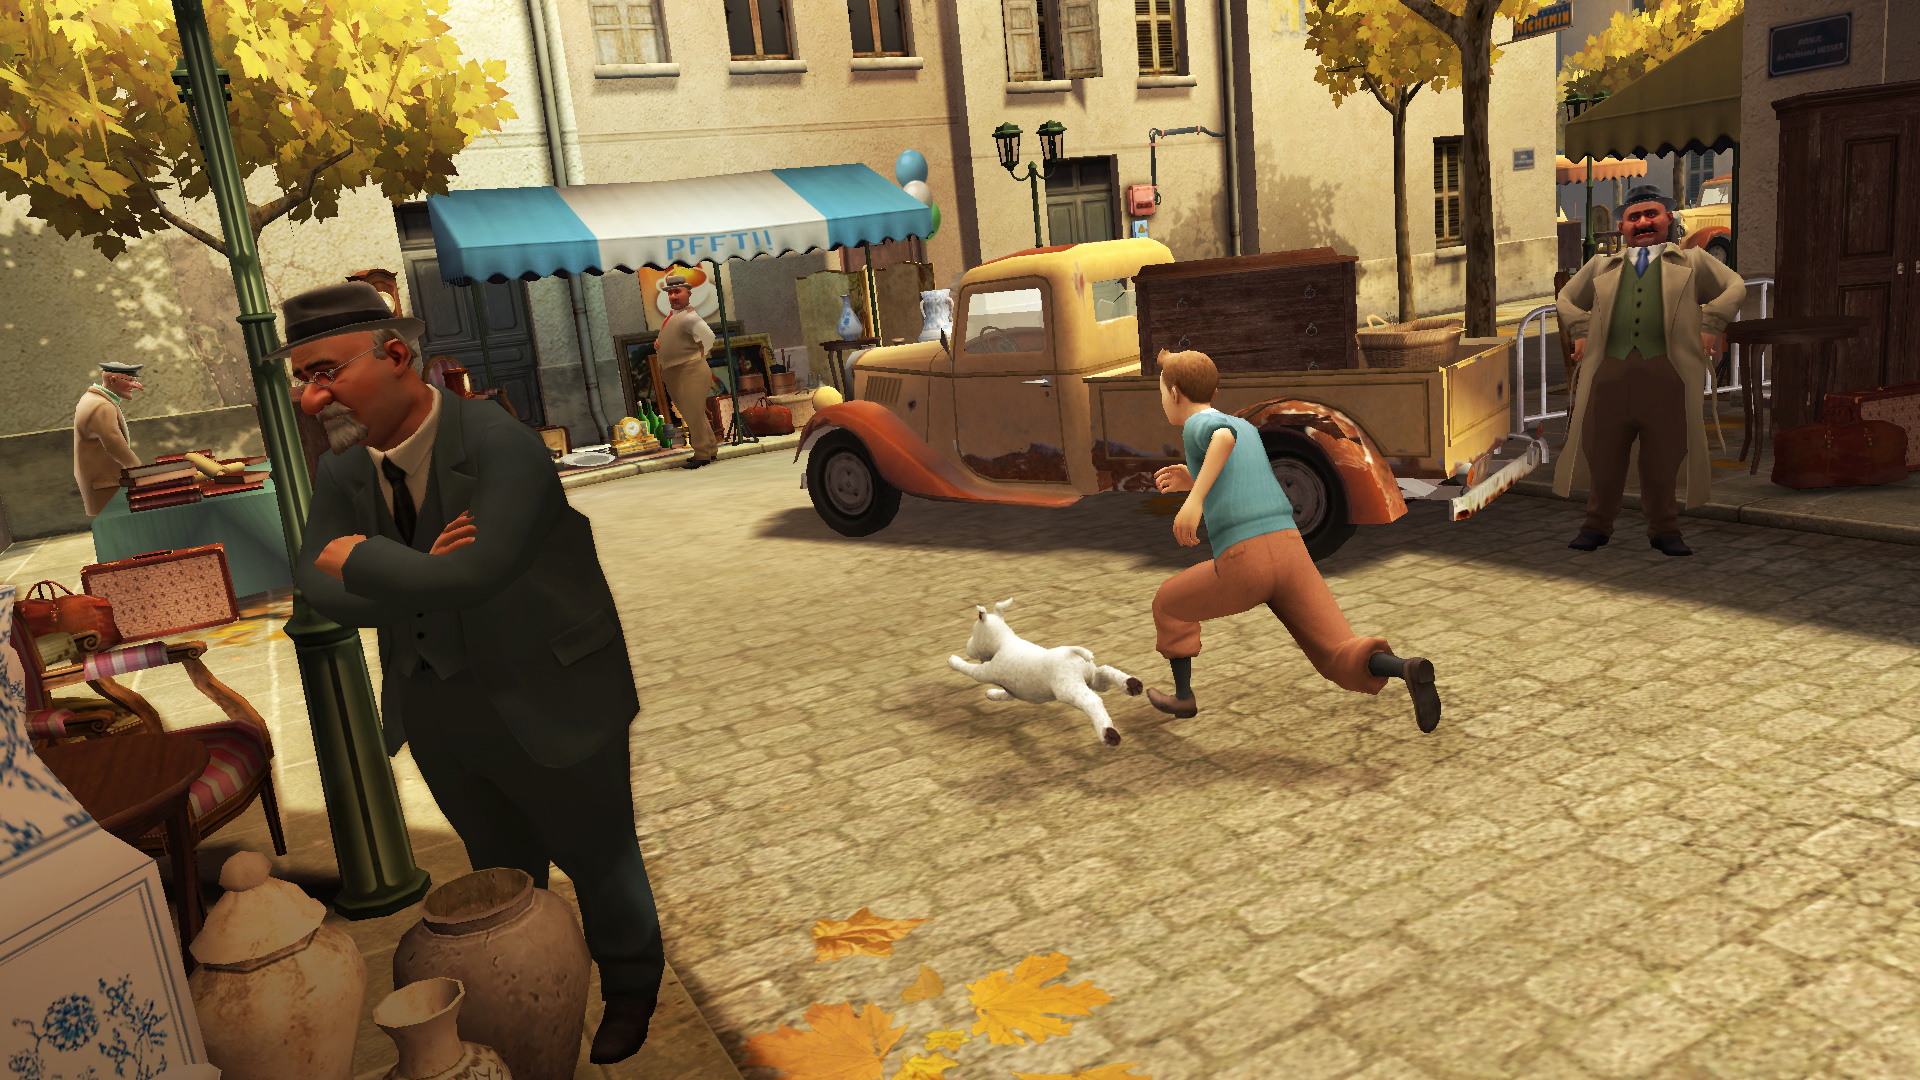 The Adventures of Tintin: The Secret of the Unicorn - The Game - screenshot 5